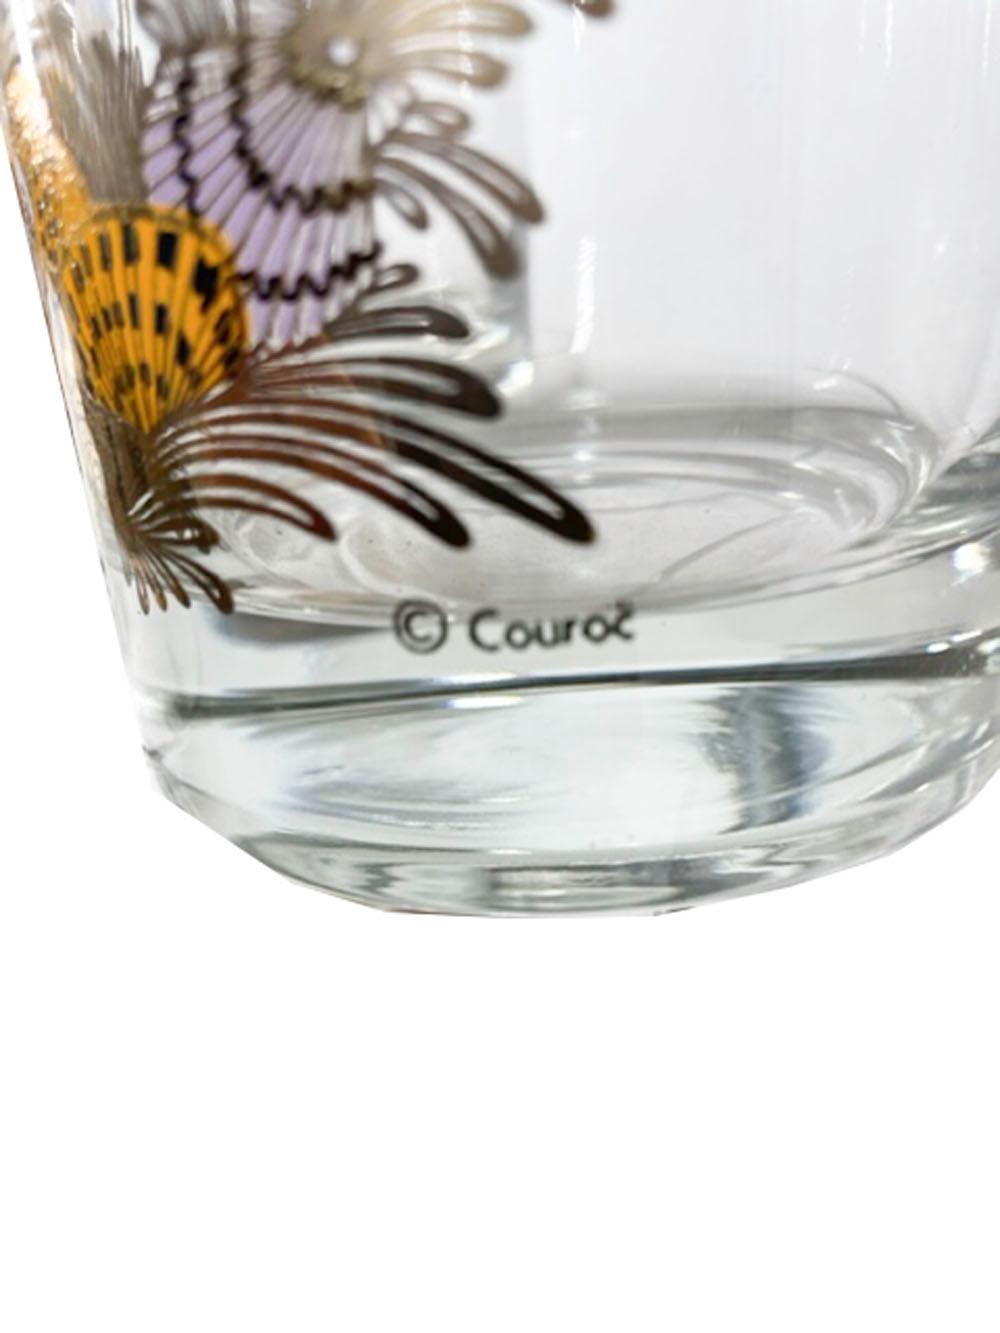 Six double rocks cocktail glasses by Couroc of Monterey with seashells and seaweed in purple and amber enamels with 22k gold.